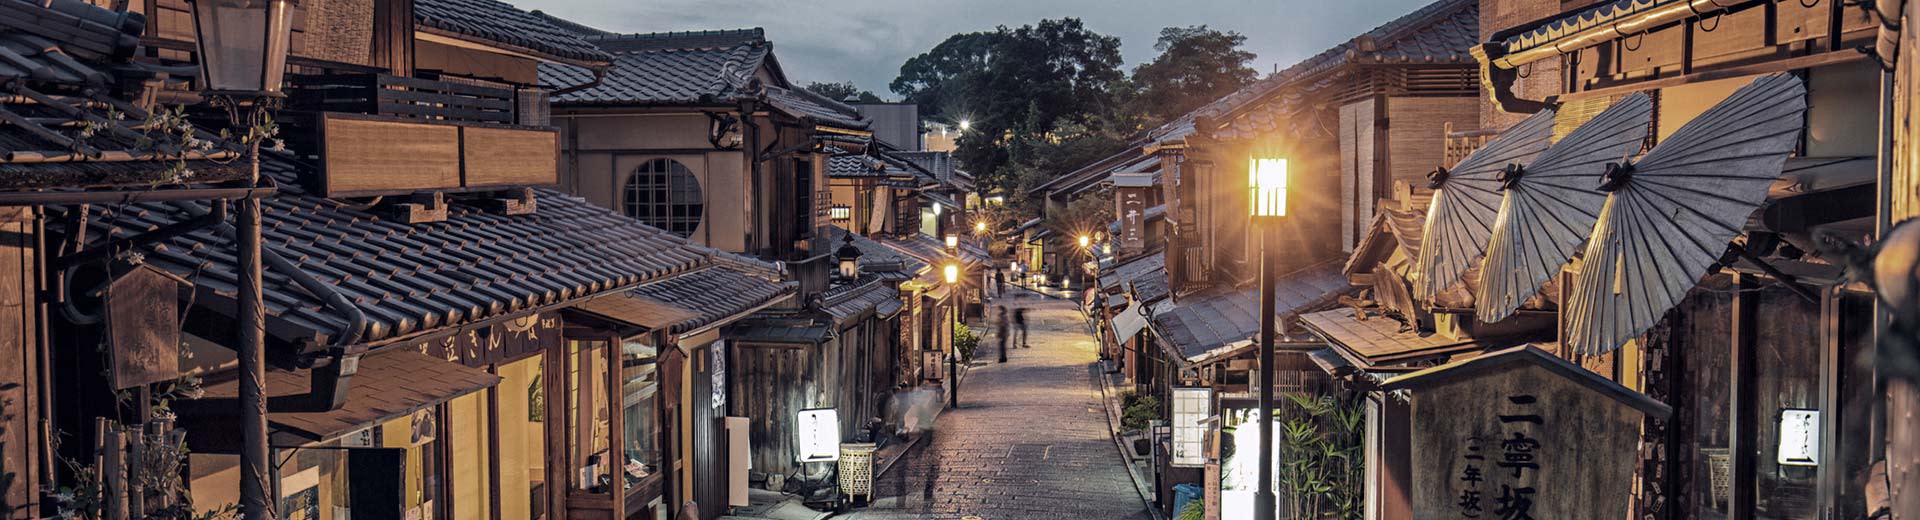 In evening light a narrow street lined with old buildings with wooden facades in Kyoto.